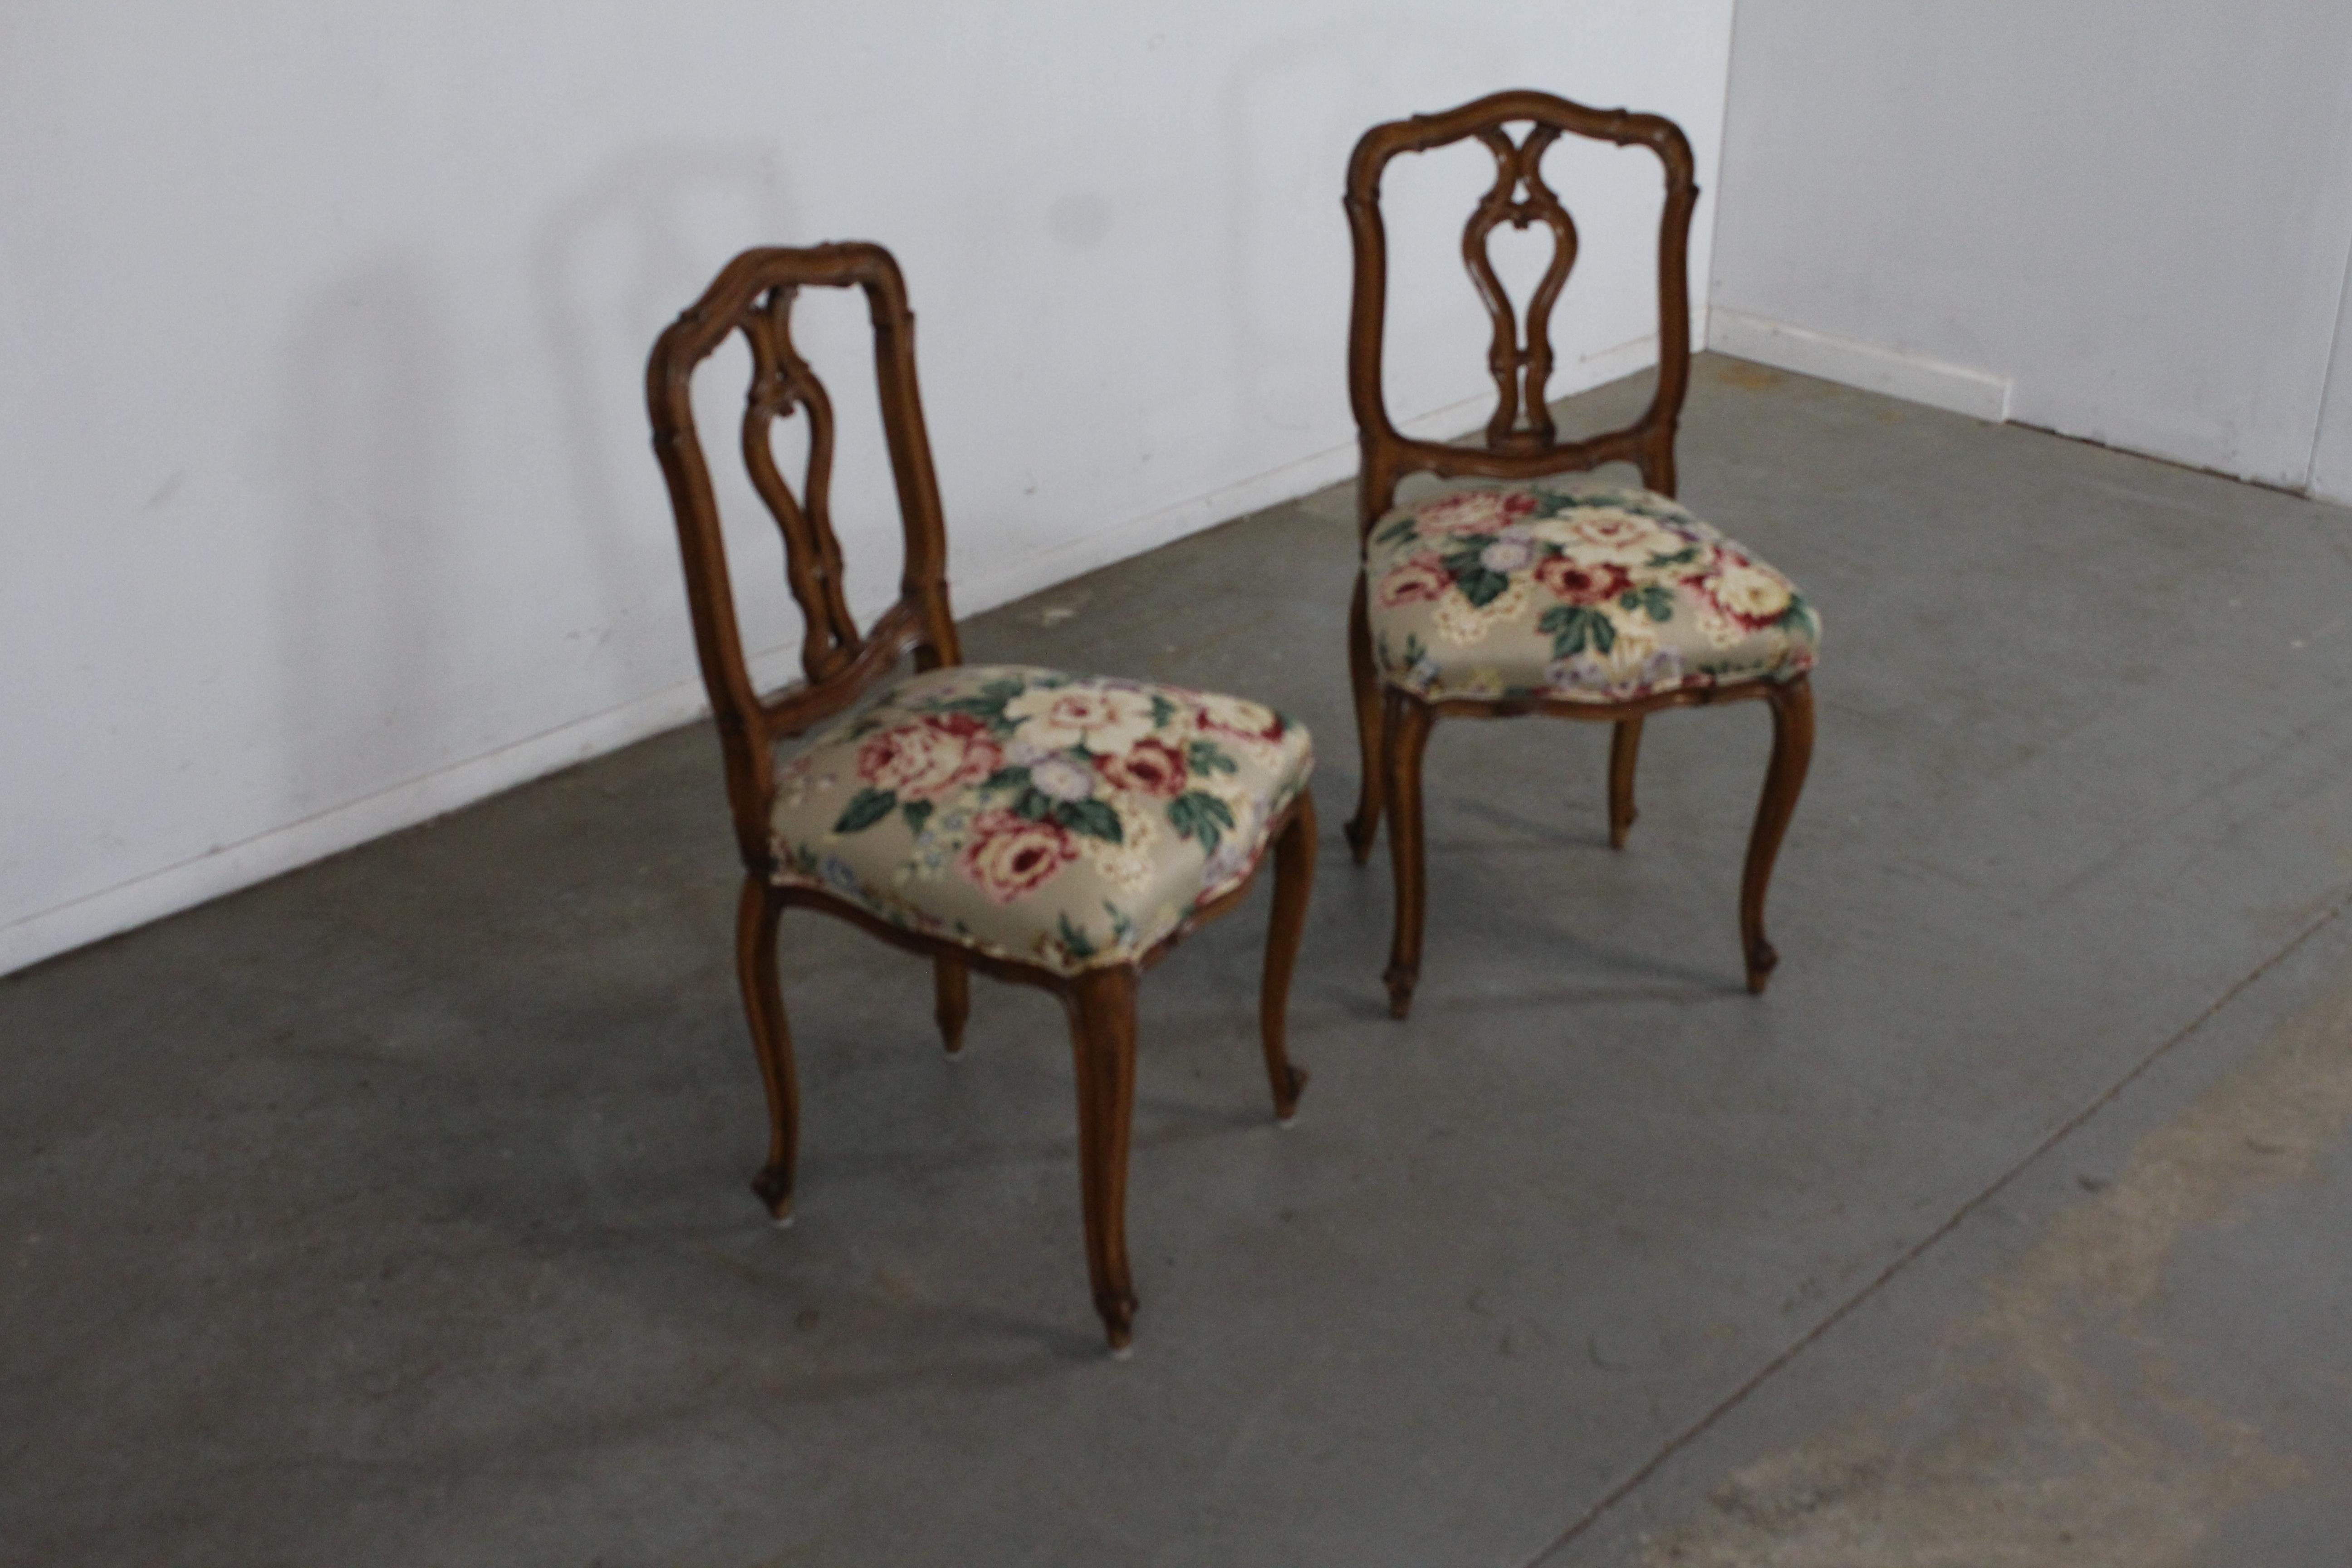 Pair of vintage Country French side chairs
Offered is a pair of vintage Country French side chairs on carved legs. They are in good vintage condition with usable upholstery & cushioning (no noticeable stains or tears). The set is